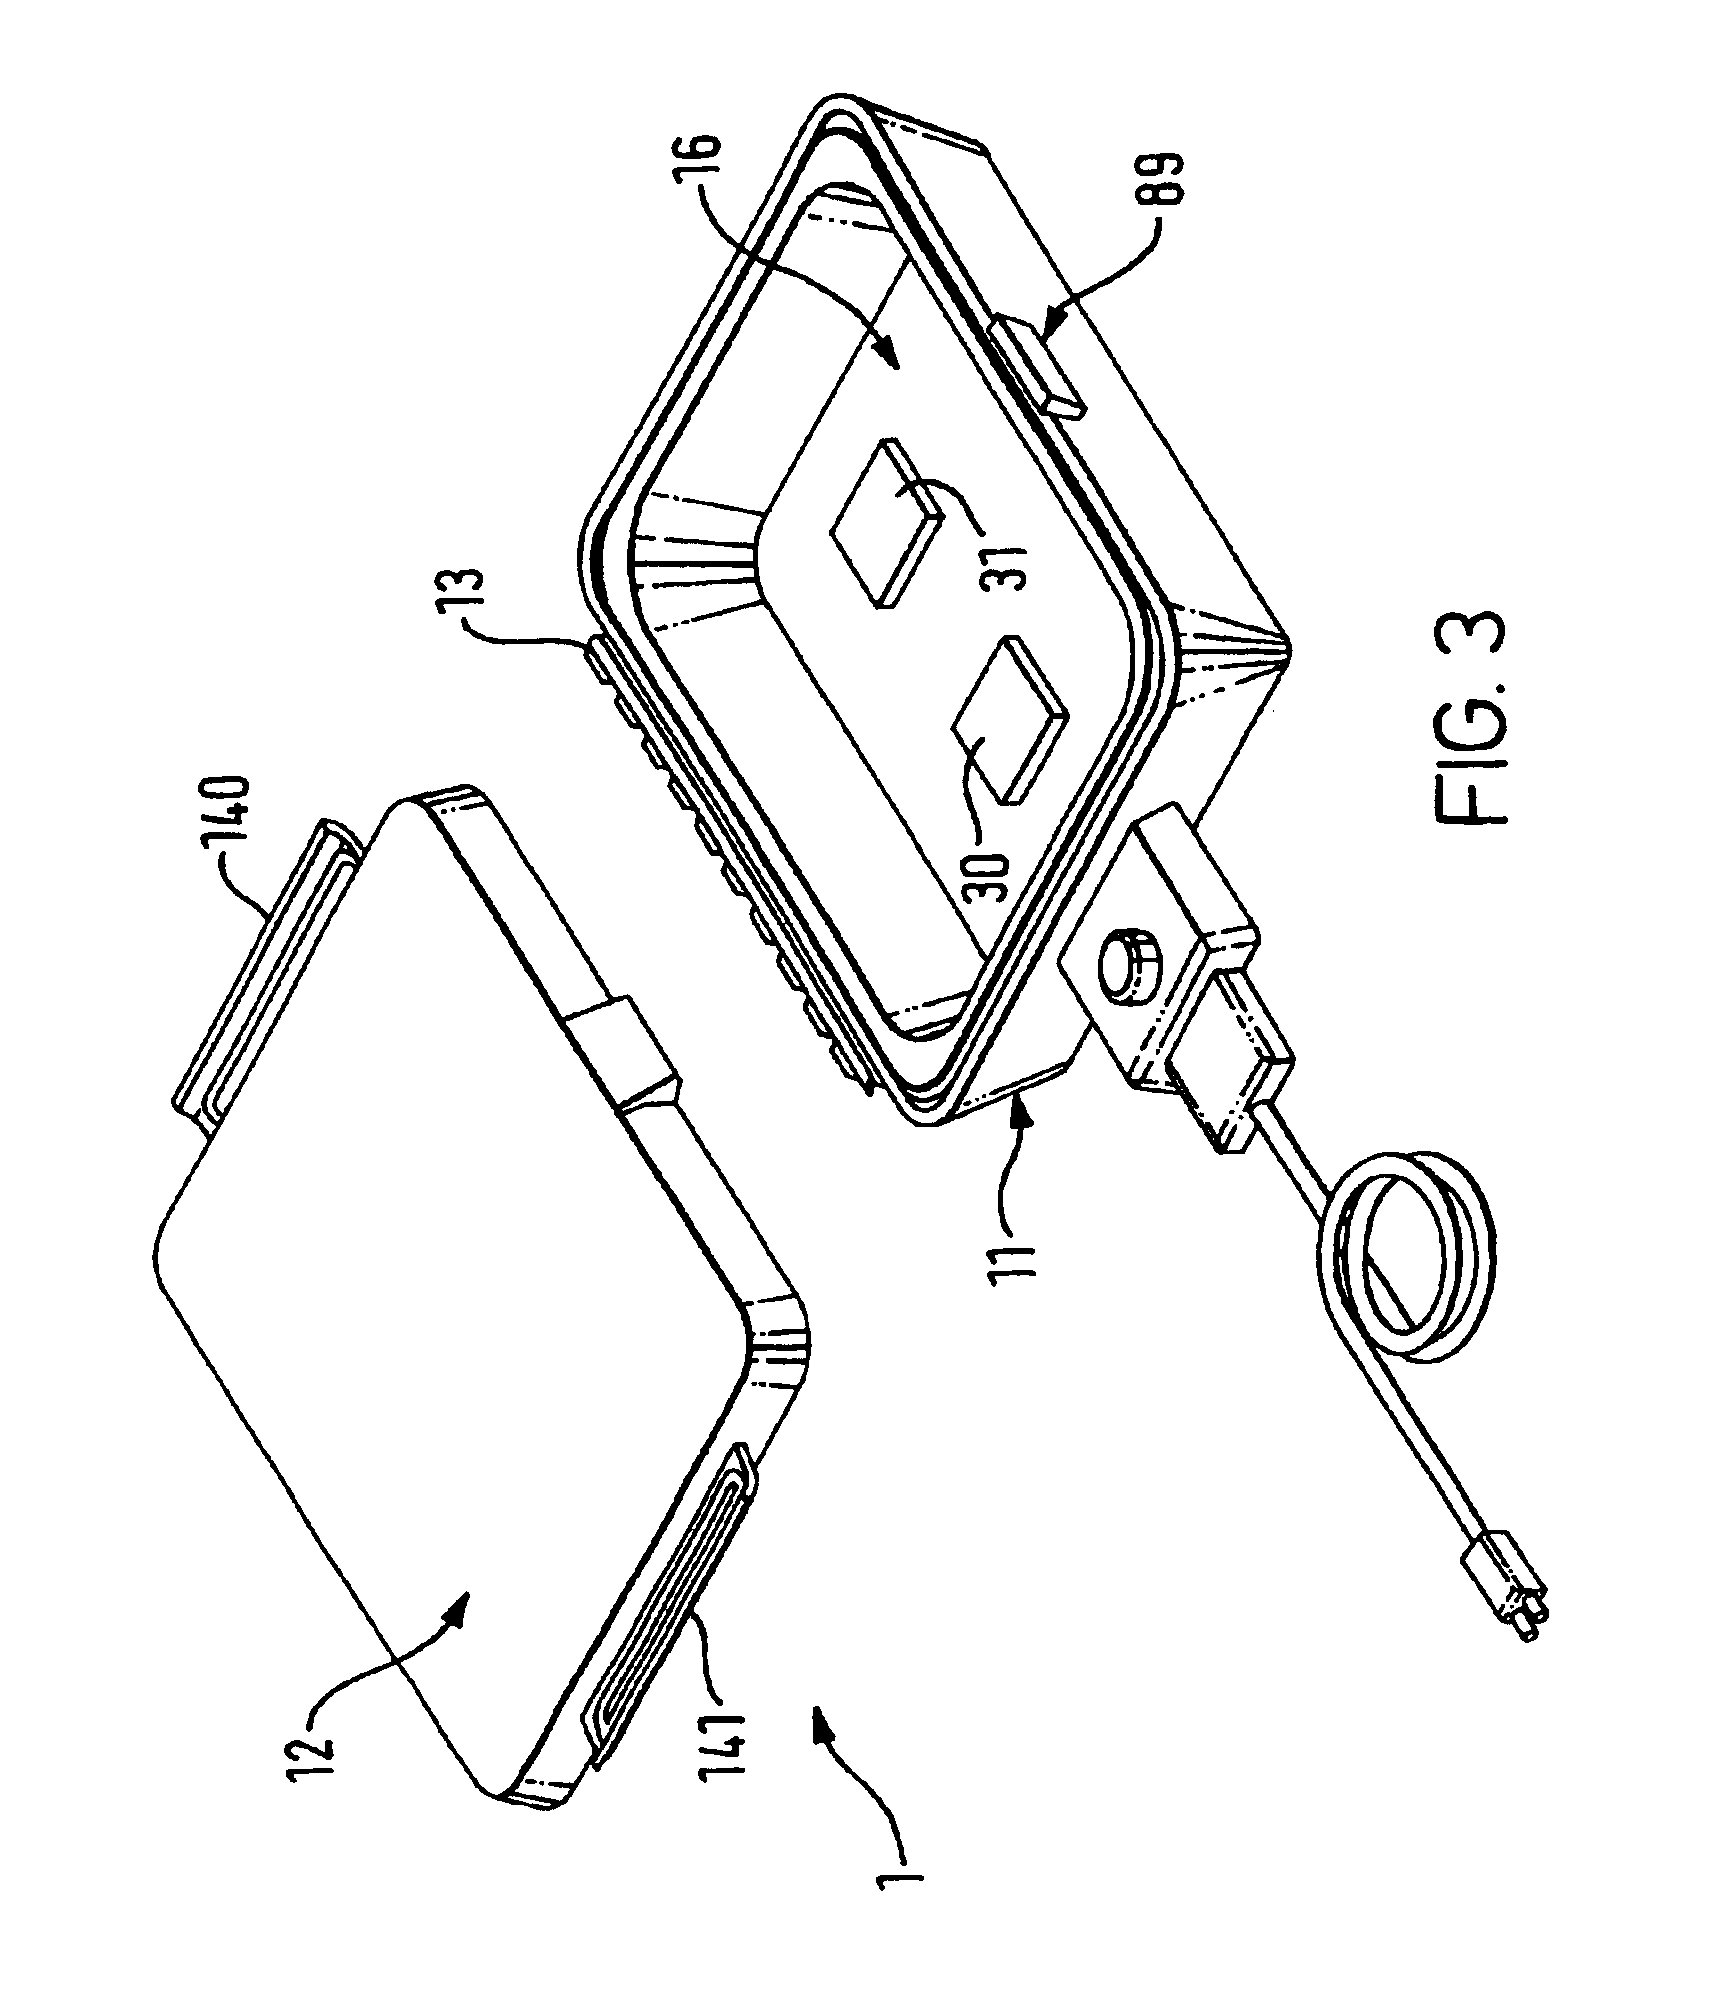 Apparatus and method of rapidly and evenly heating a packaged food product